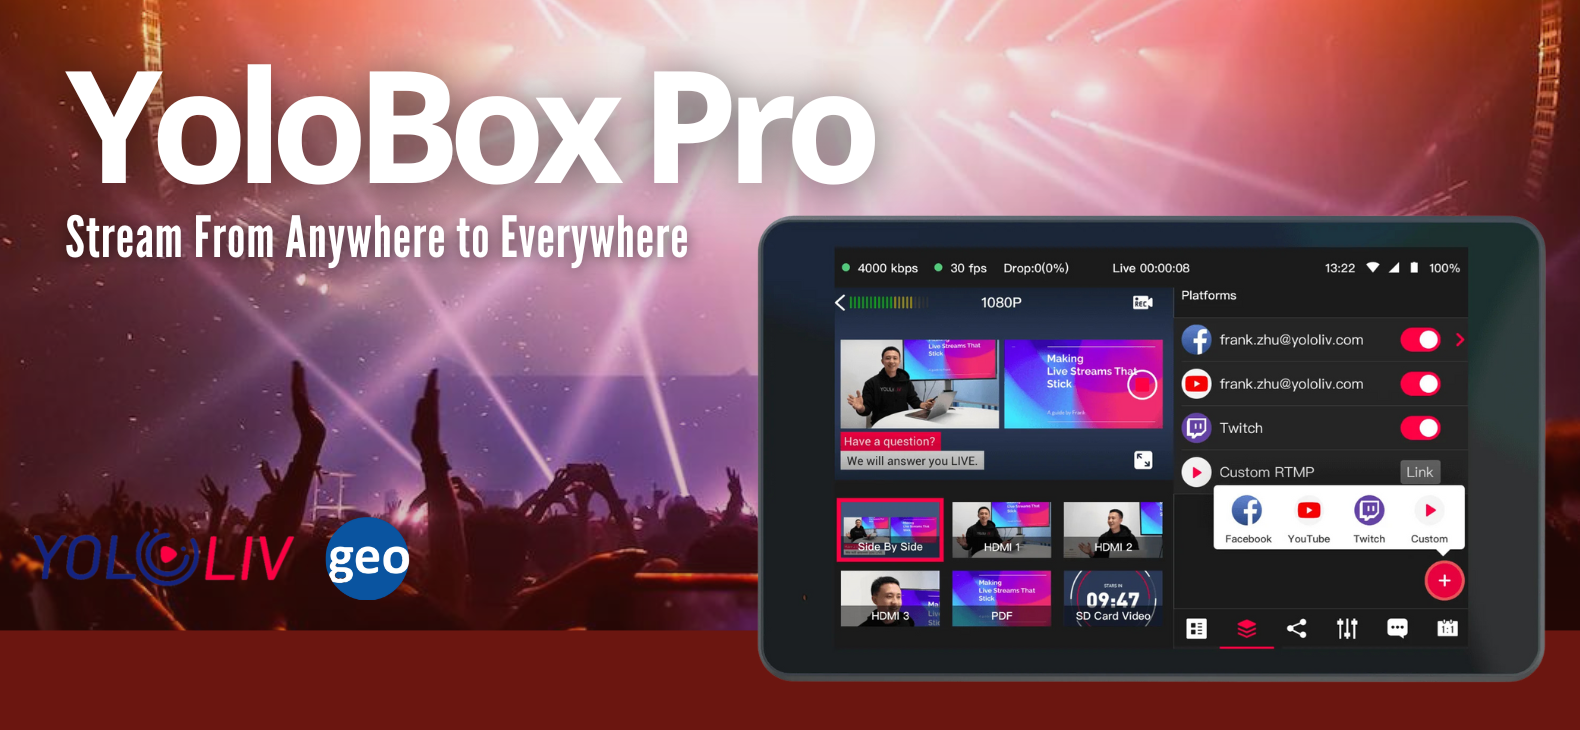 YoloLiv: YoloBox Pro is the best powerful all-in-one live streaming and switching system.